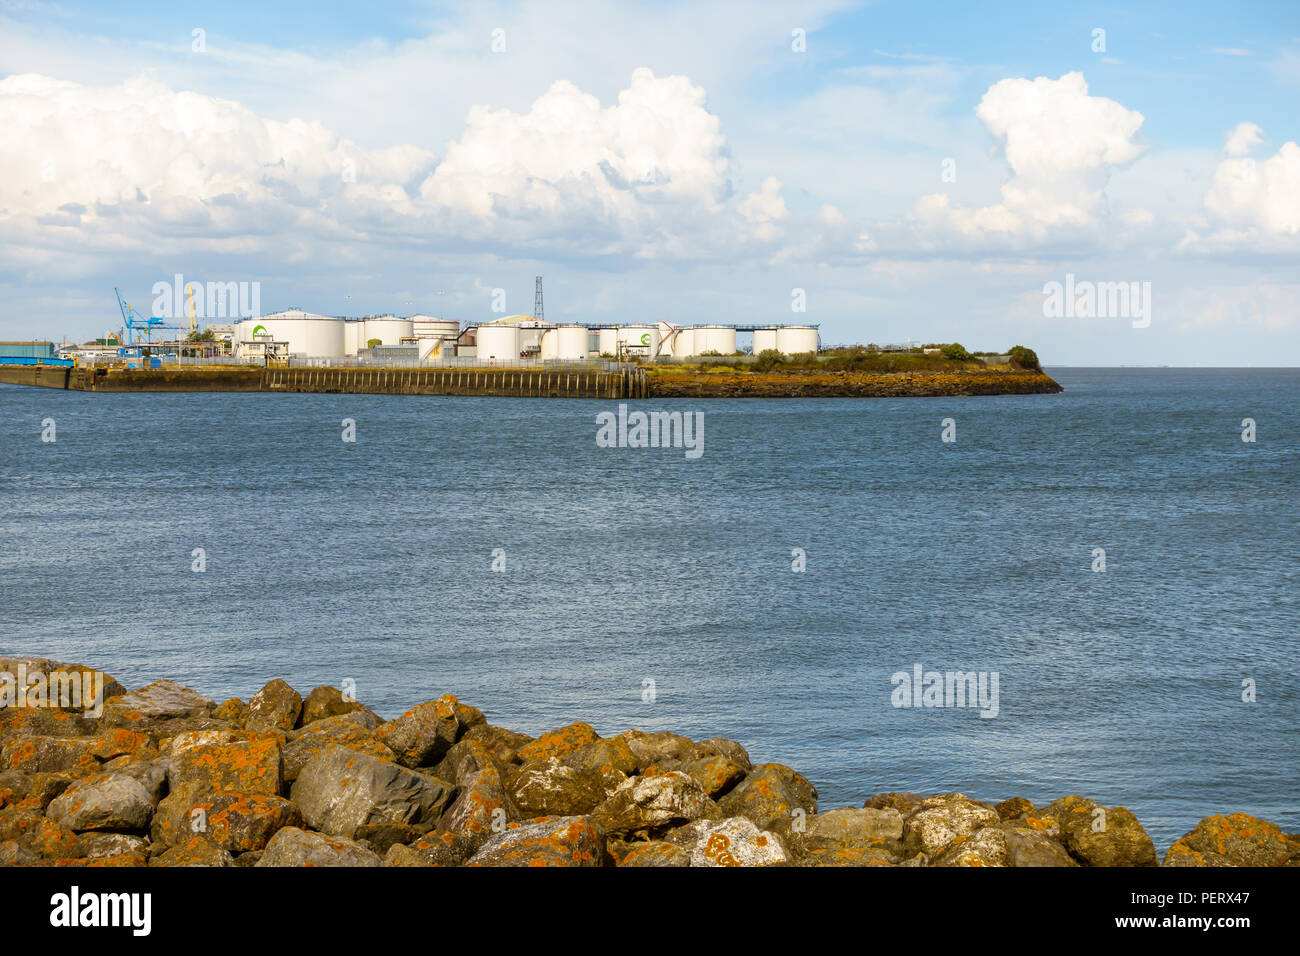 Cardiff, United Kingdom - August 09, 2018: Oil storage tanks at the Queen Alexandra Dock in Cardiff, Cardiff Bay. Stock Photo